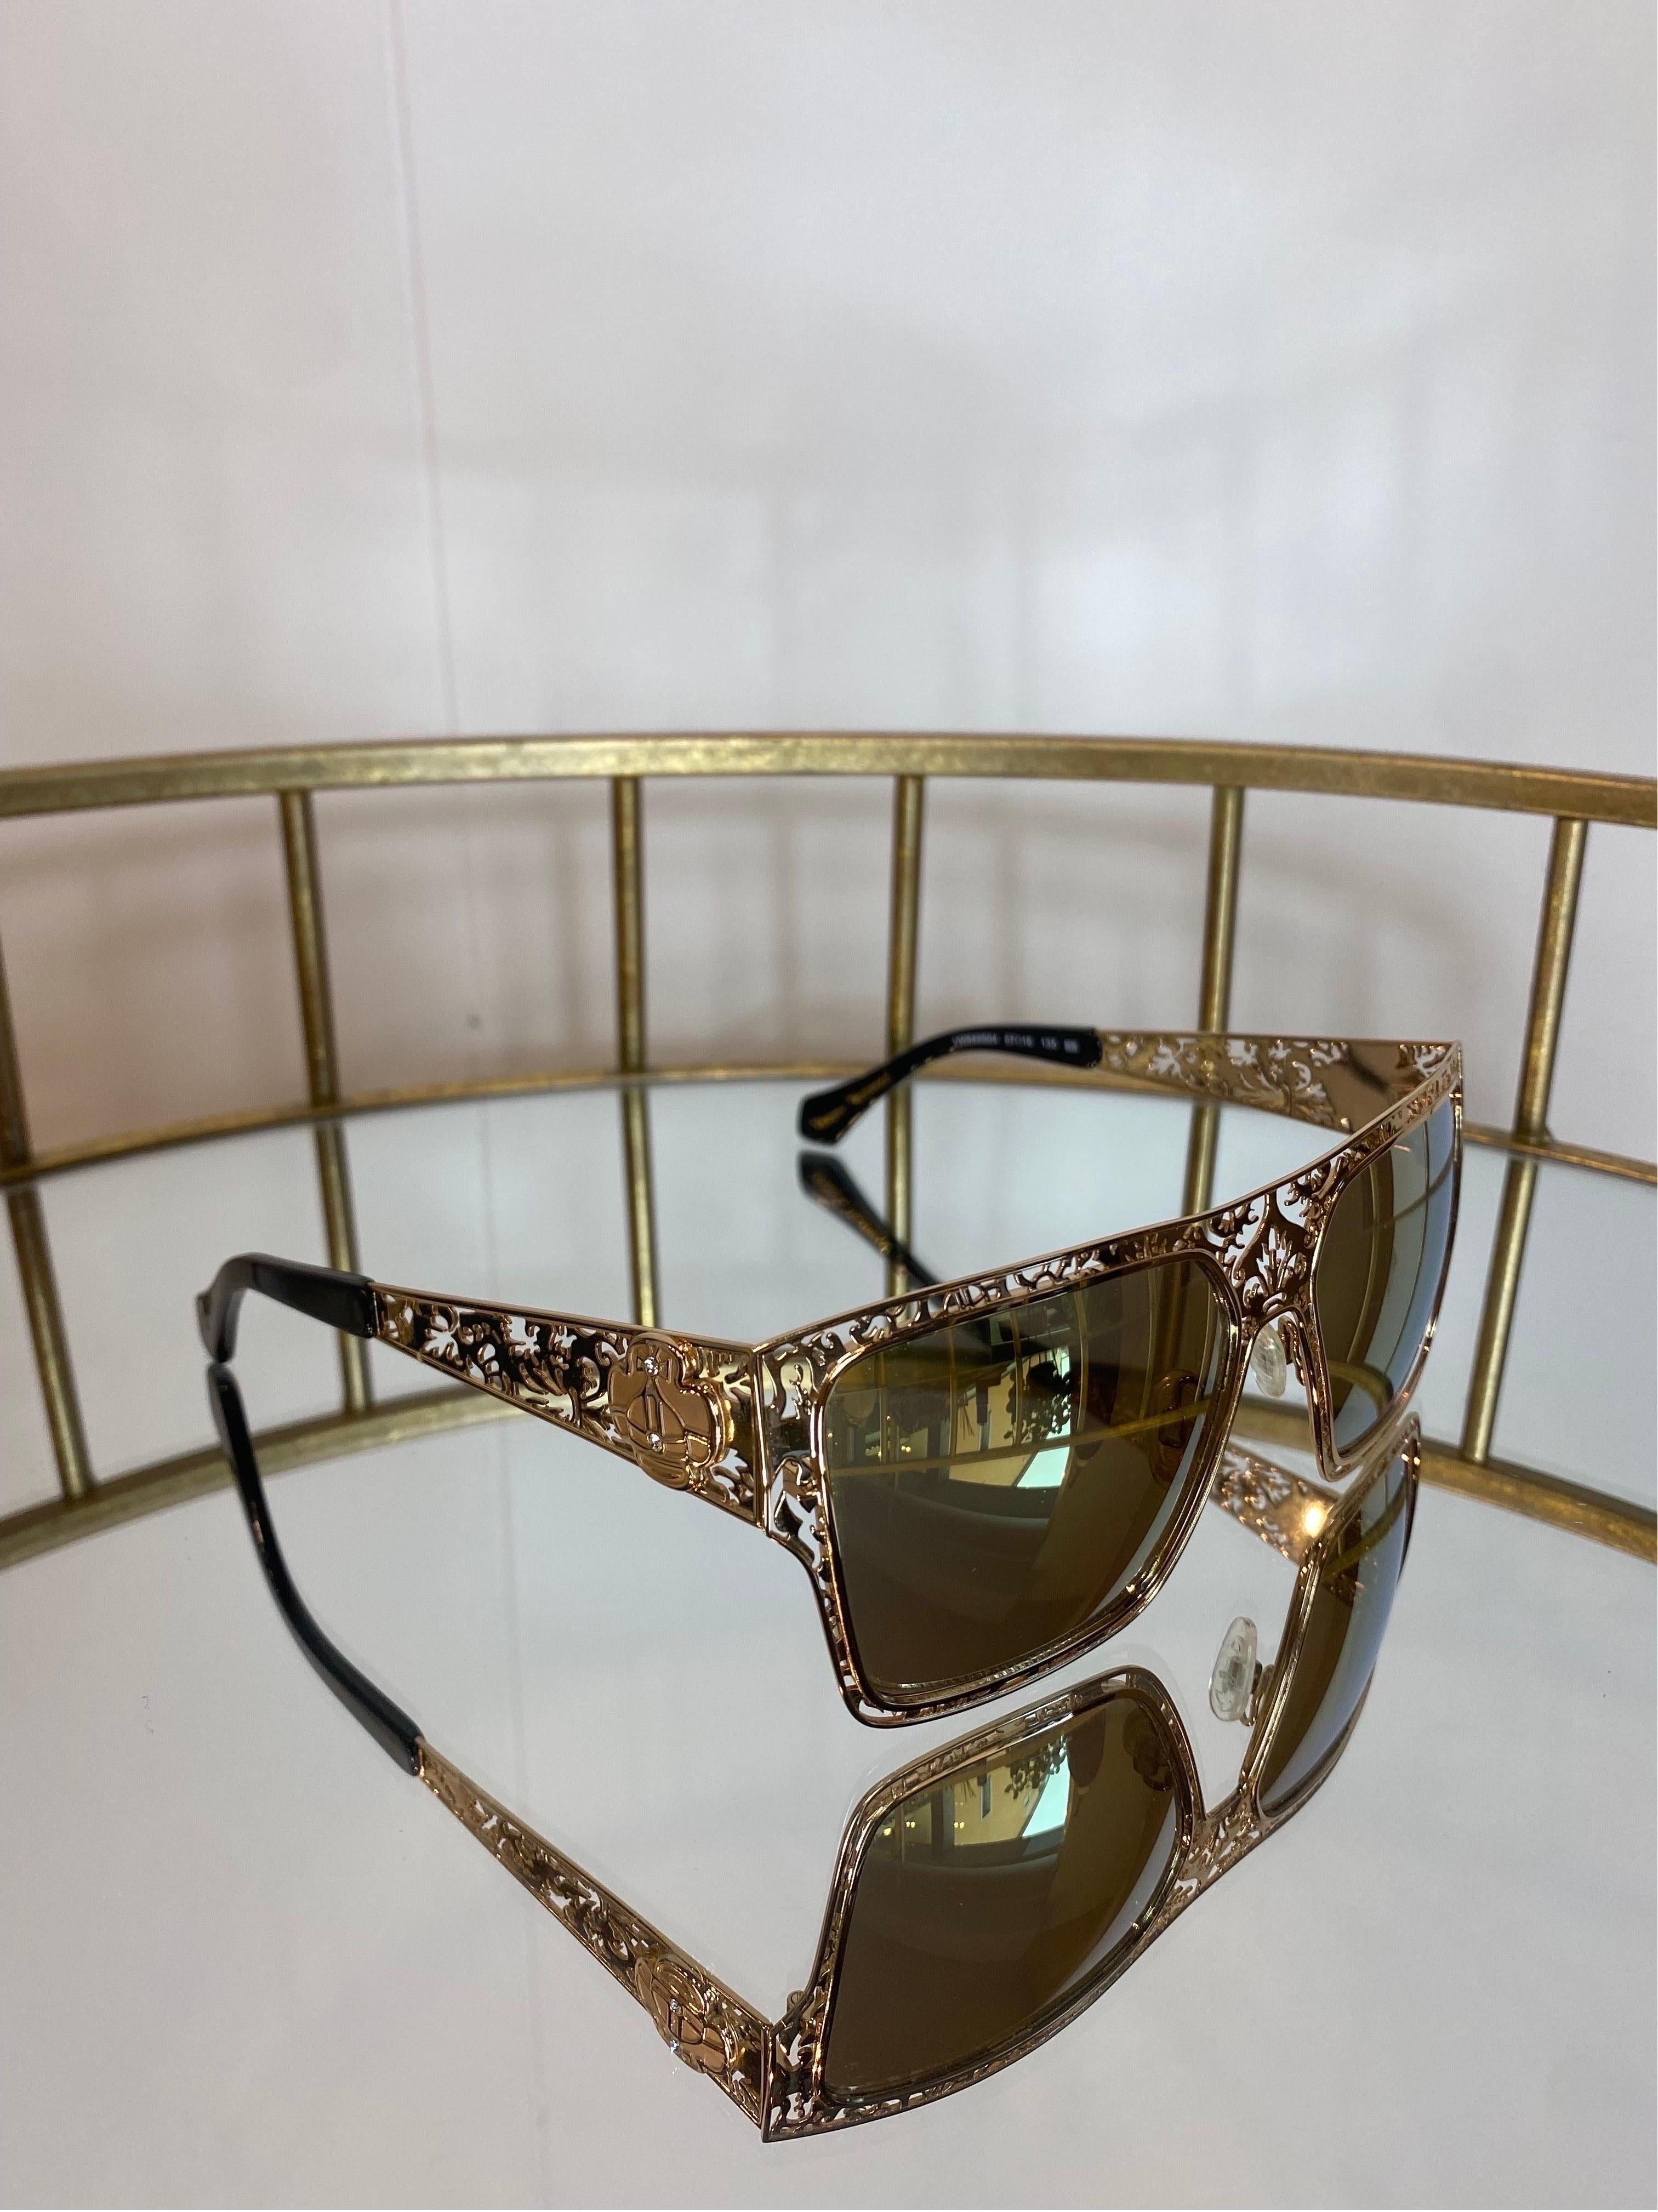 Vivienne Westwood golden glasses
Yellow mirror lens. Wrought and golden frame.
Metal.
Original golden case with logo.
Width 14
Height 5
Arm length 14
In addition to being in good condition, it shows normal signs of use.